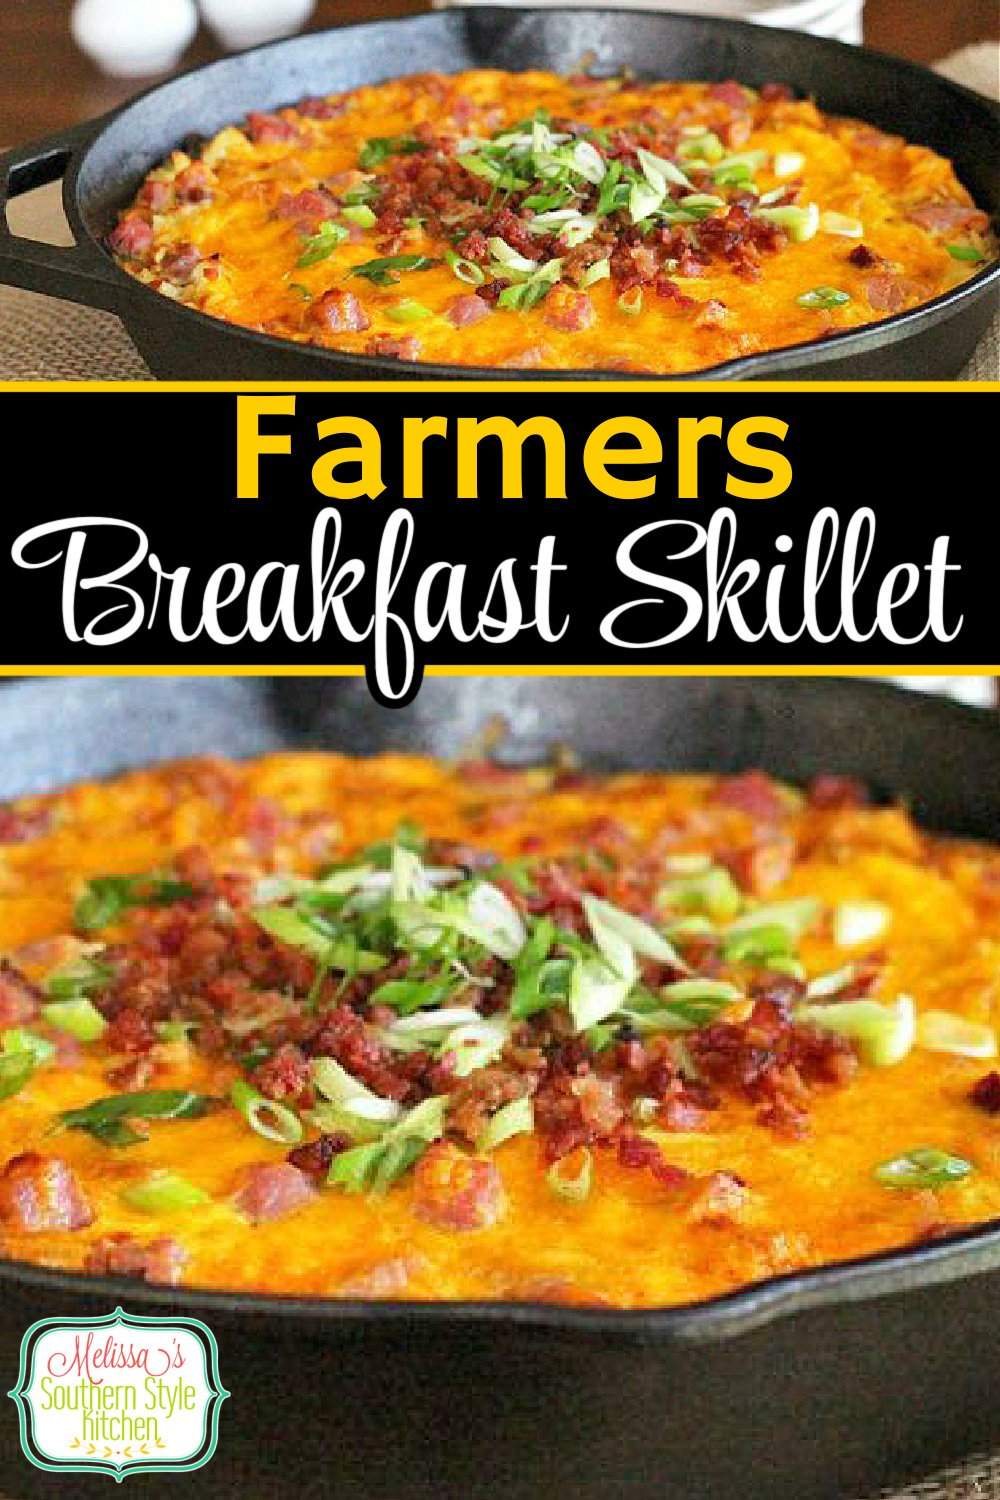 Start your morning with this cheesy skillet filled with ham, eggs and hash browns #farmersbreakfastskillet #eggs #baconandeggs #hahsbrowns #farmersbreakfast #brunchrecipes #breakfast #southernfood #southernrecipes #bacon #holidaybrunch #castironrecipes via @melissasssk